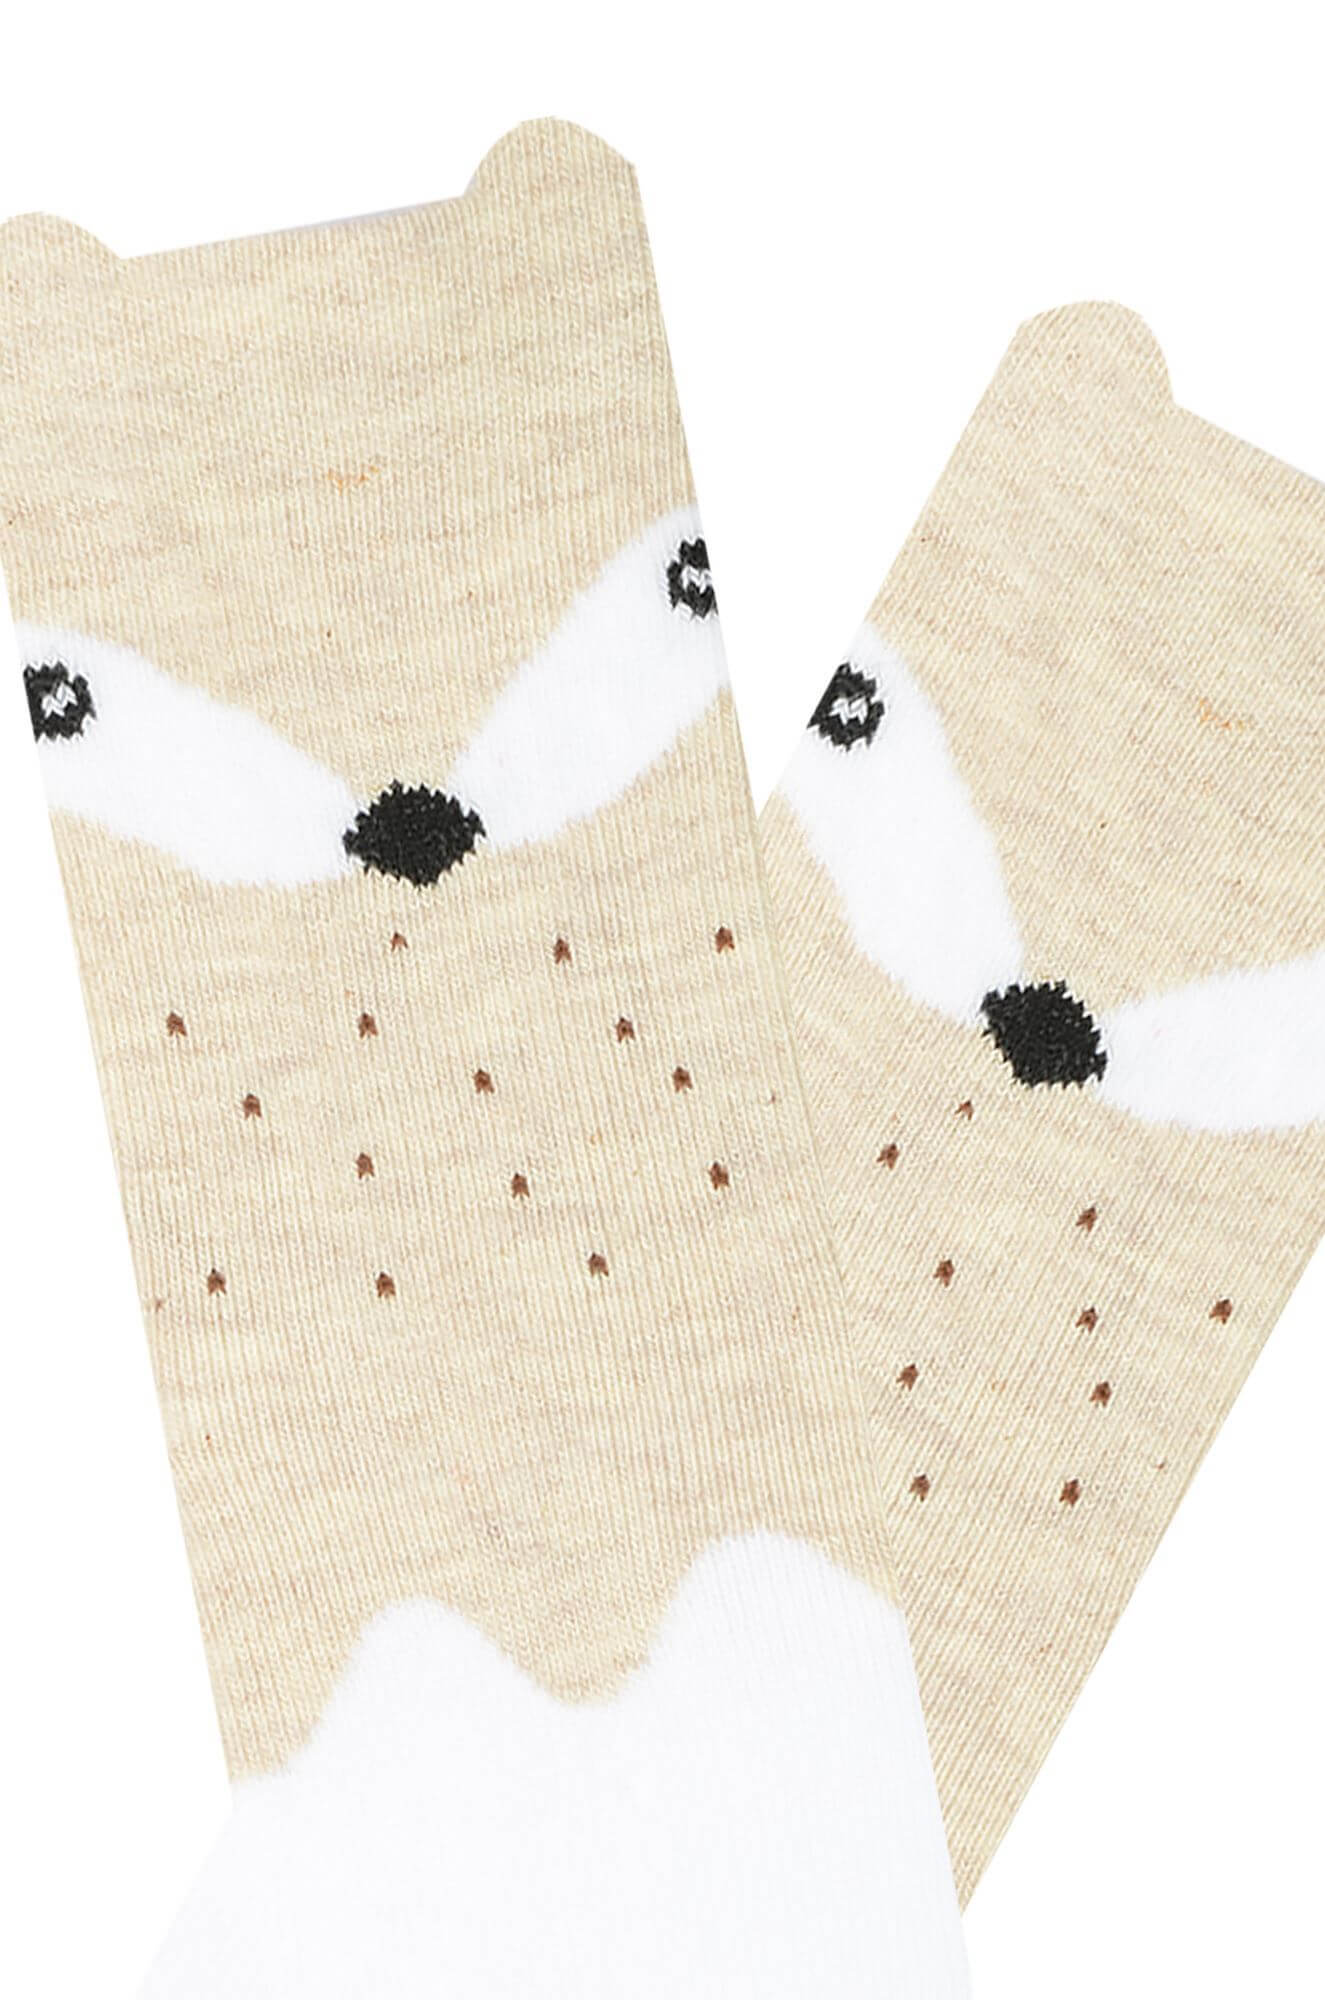 Kid's 3D Fox Under Knee Socks by Sockmate, beige colors foxes knee high socks for age 1 to 3